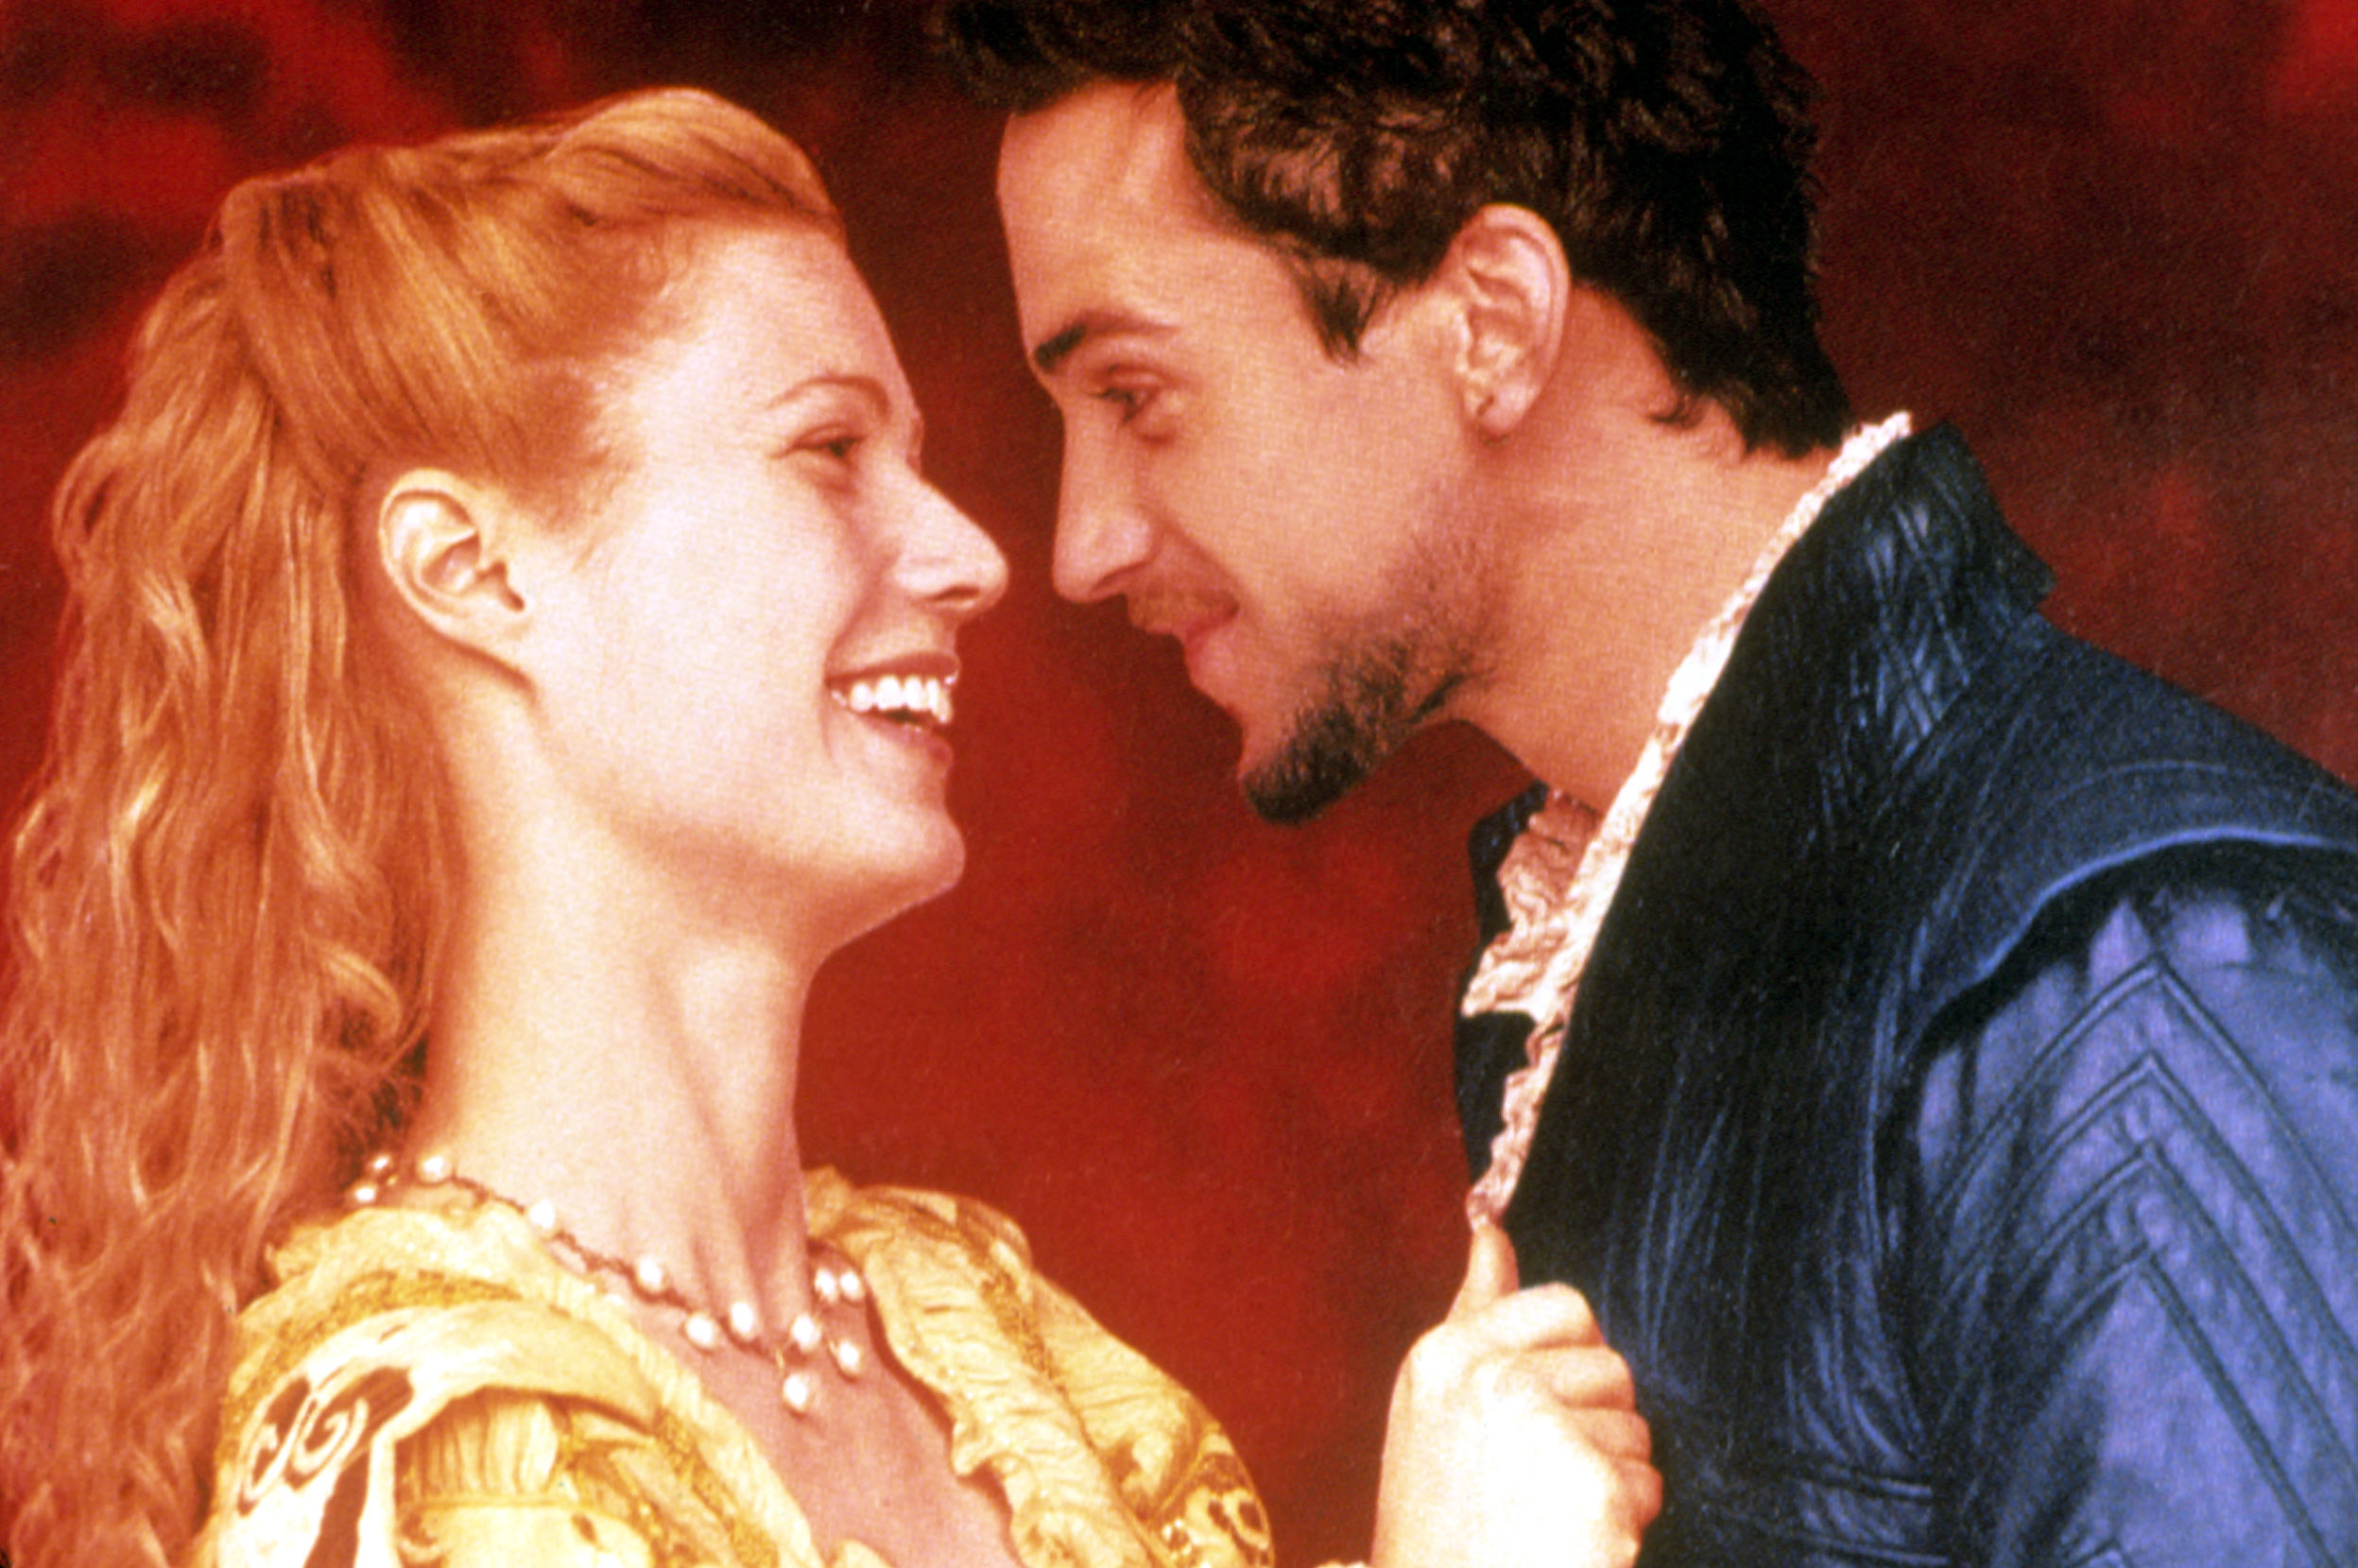 Gwyneth Paltrow as Viola and Joseph Fiennes as William in historical costume smiling at each other